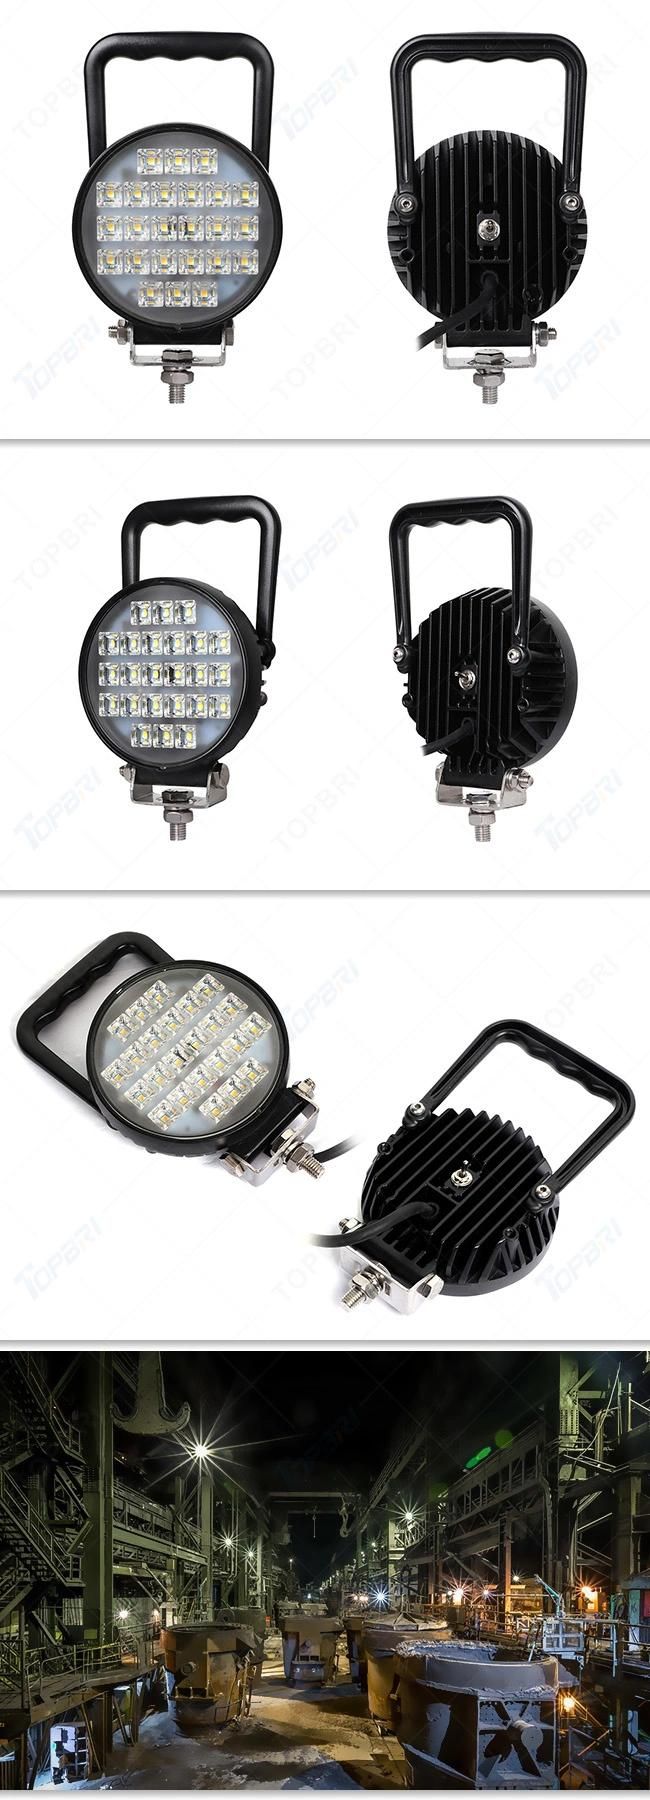 Auto LED Working Light 4.3inch 36W Flood LED Portable Work Lamps